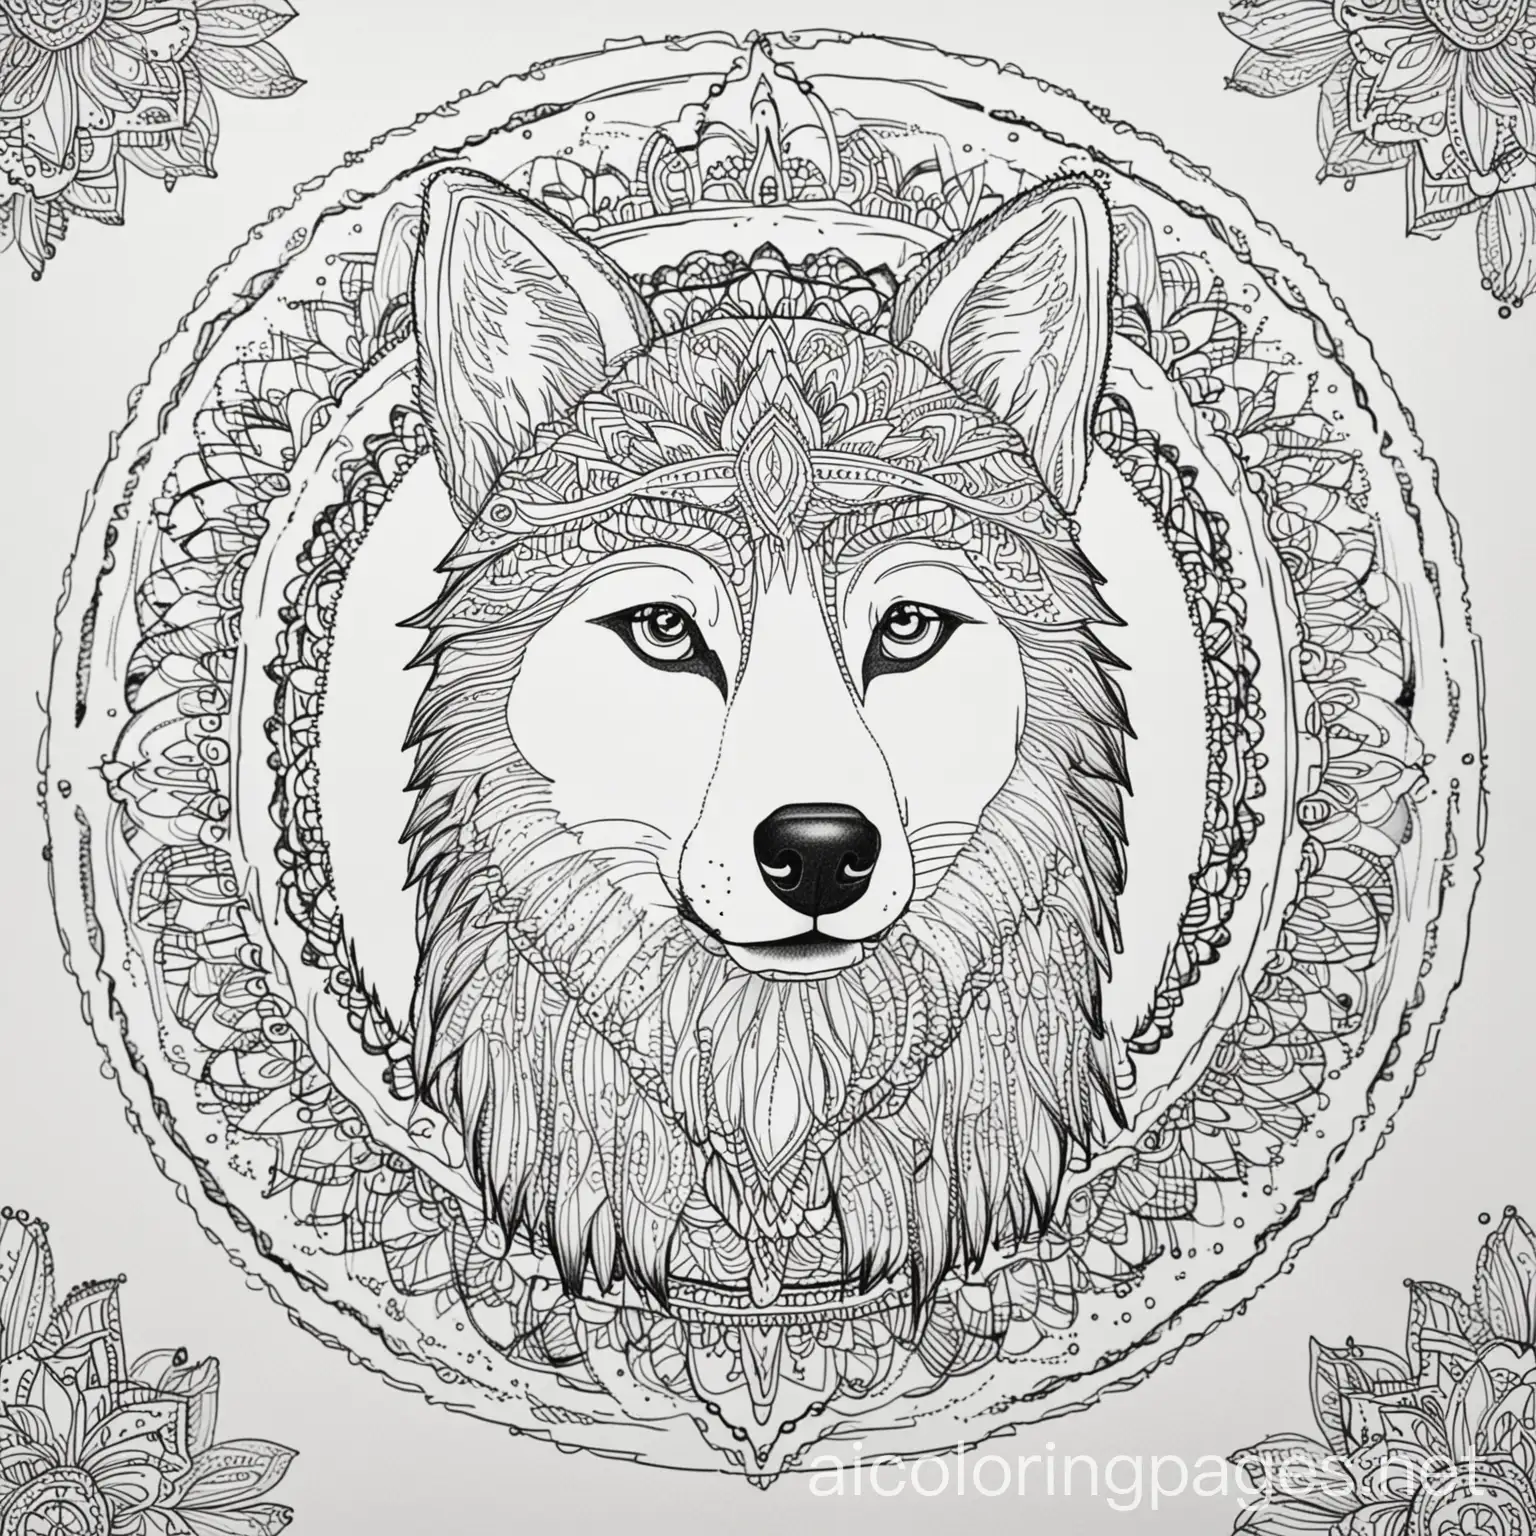 Husky dog mandala, Coloring Page, black and white, line art, white background, Simplicity, Ample White Space. The background of the coloring page is plain white to make it easy for young children to color within the lines. The outlines of all the subjects are easy to distinguish, making it simple for kids to color without too much difficulty